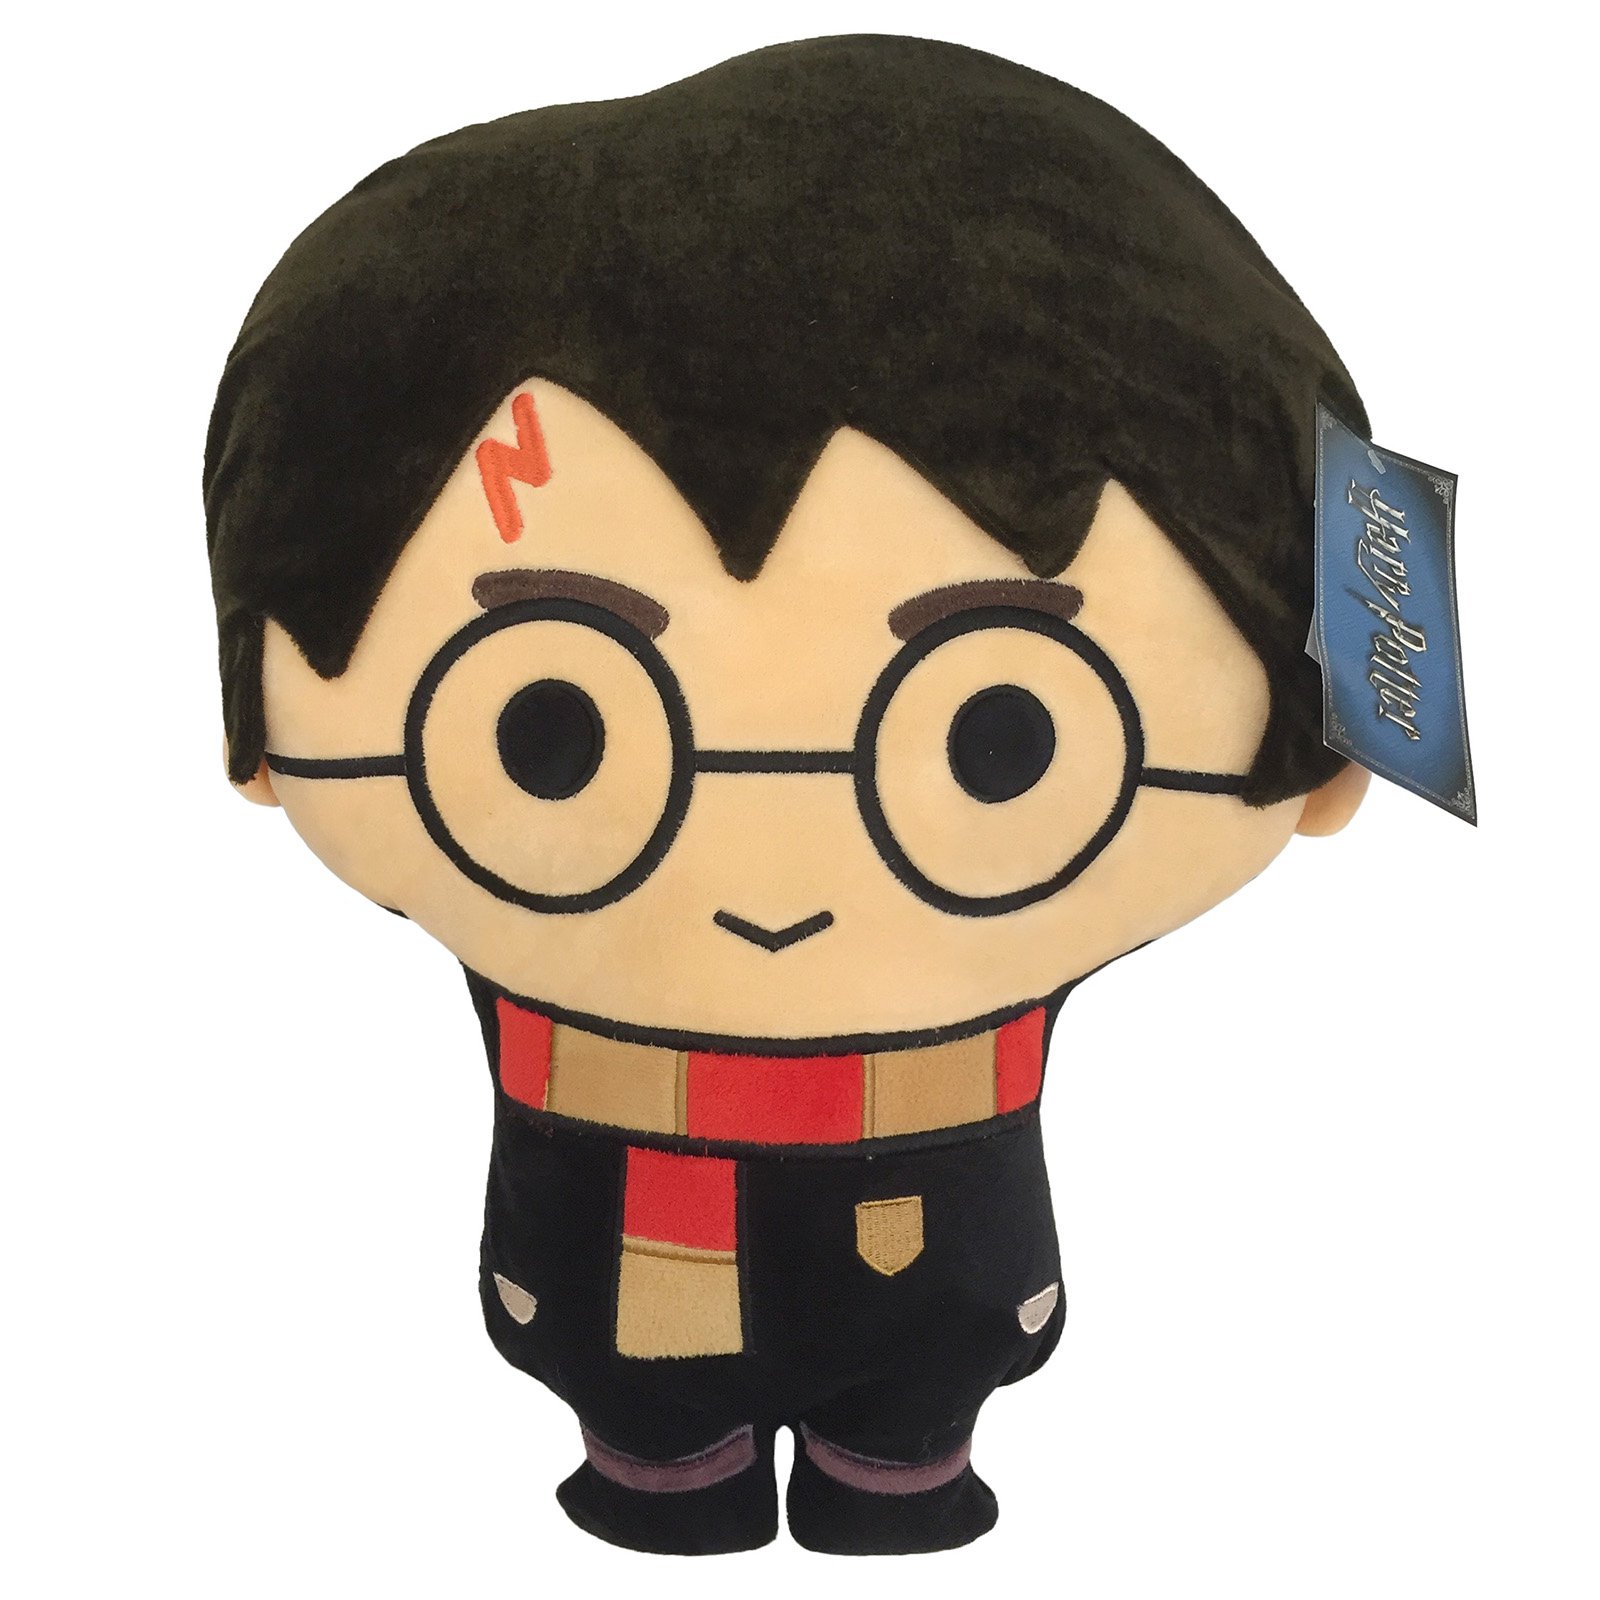 Harry Potter Plush Stuffed Kids Pillow Buddy, Polyester, Multicolor - image 2 of 2